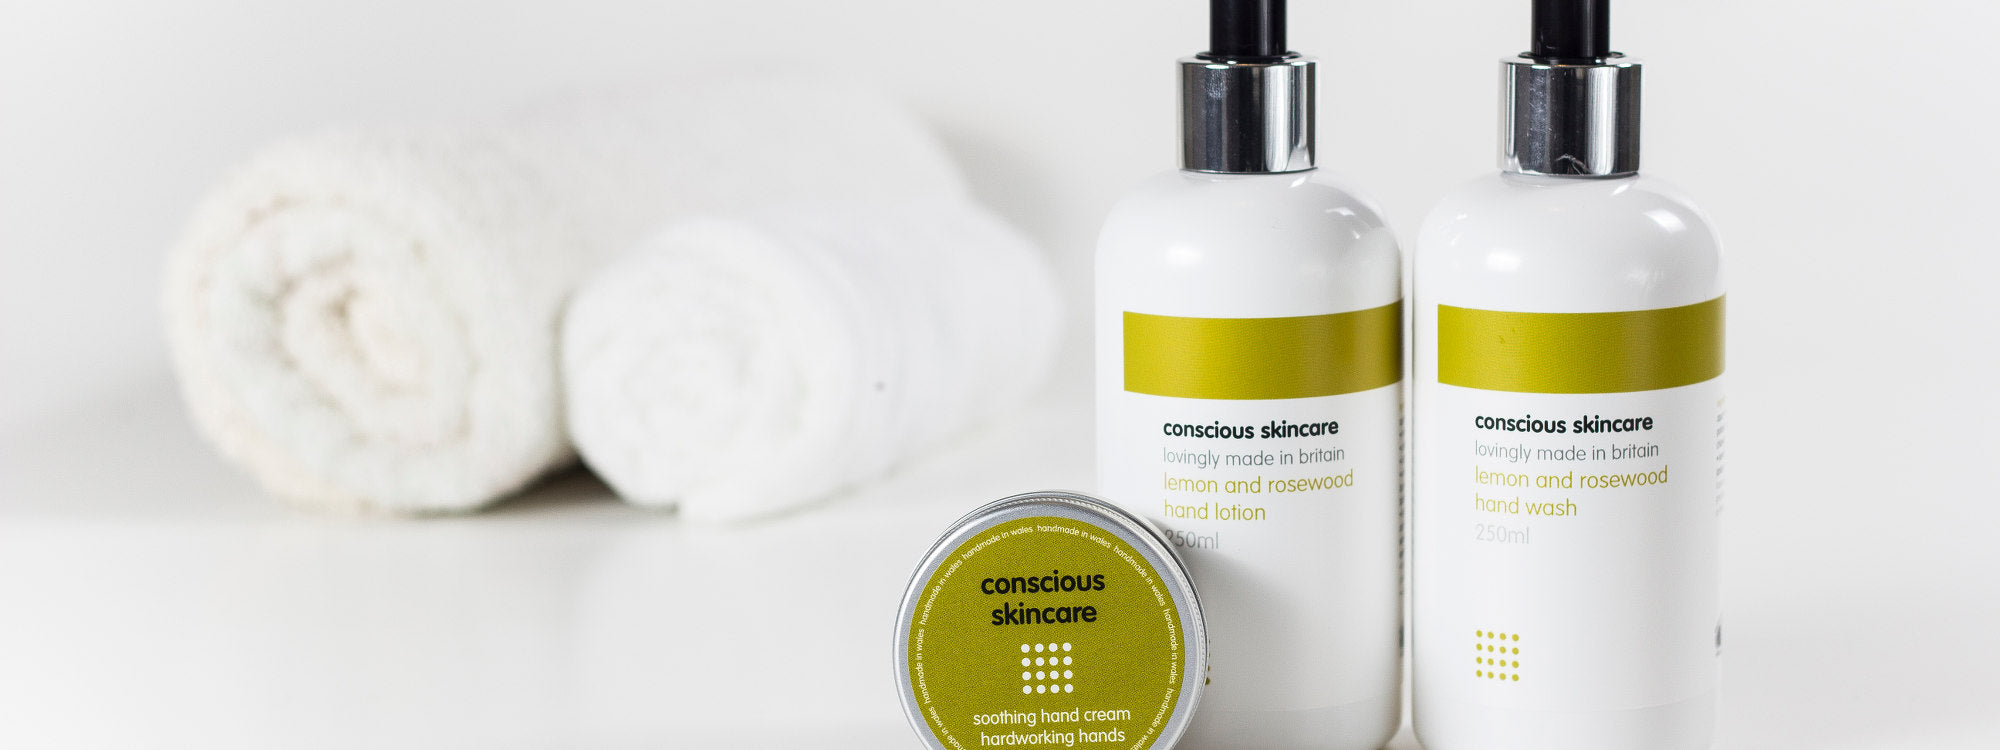 Vegan hand care range by conscious skincare with hand cream, hand wash and hand lotion